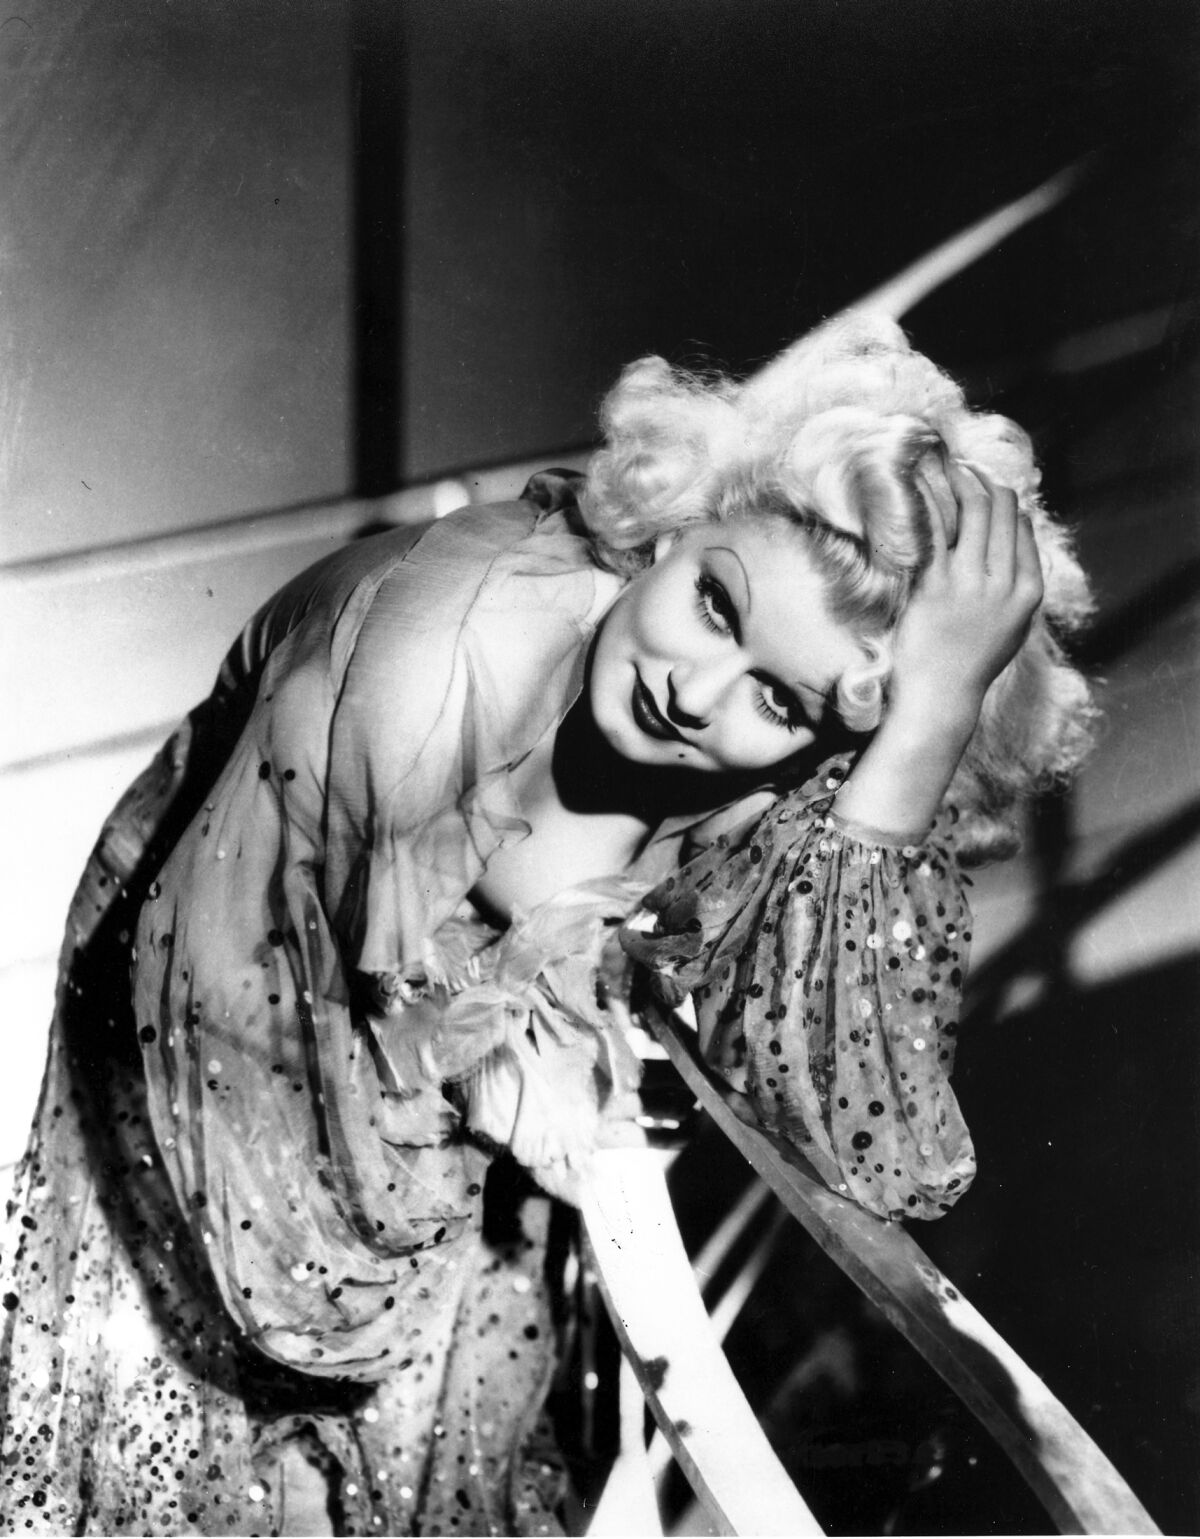 A woman with white blond hair and dramatic makeup and wearing a sparkling gown leans against a railing.